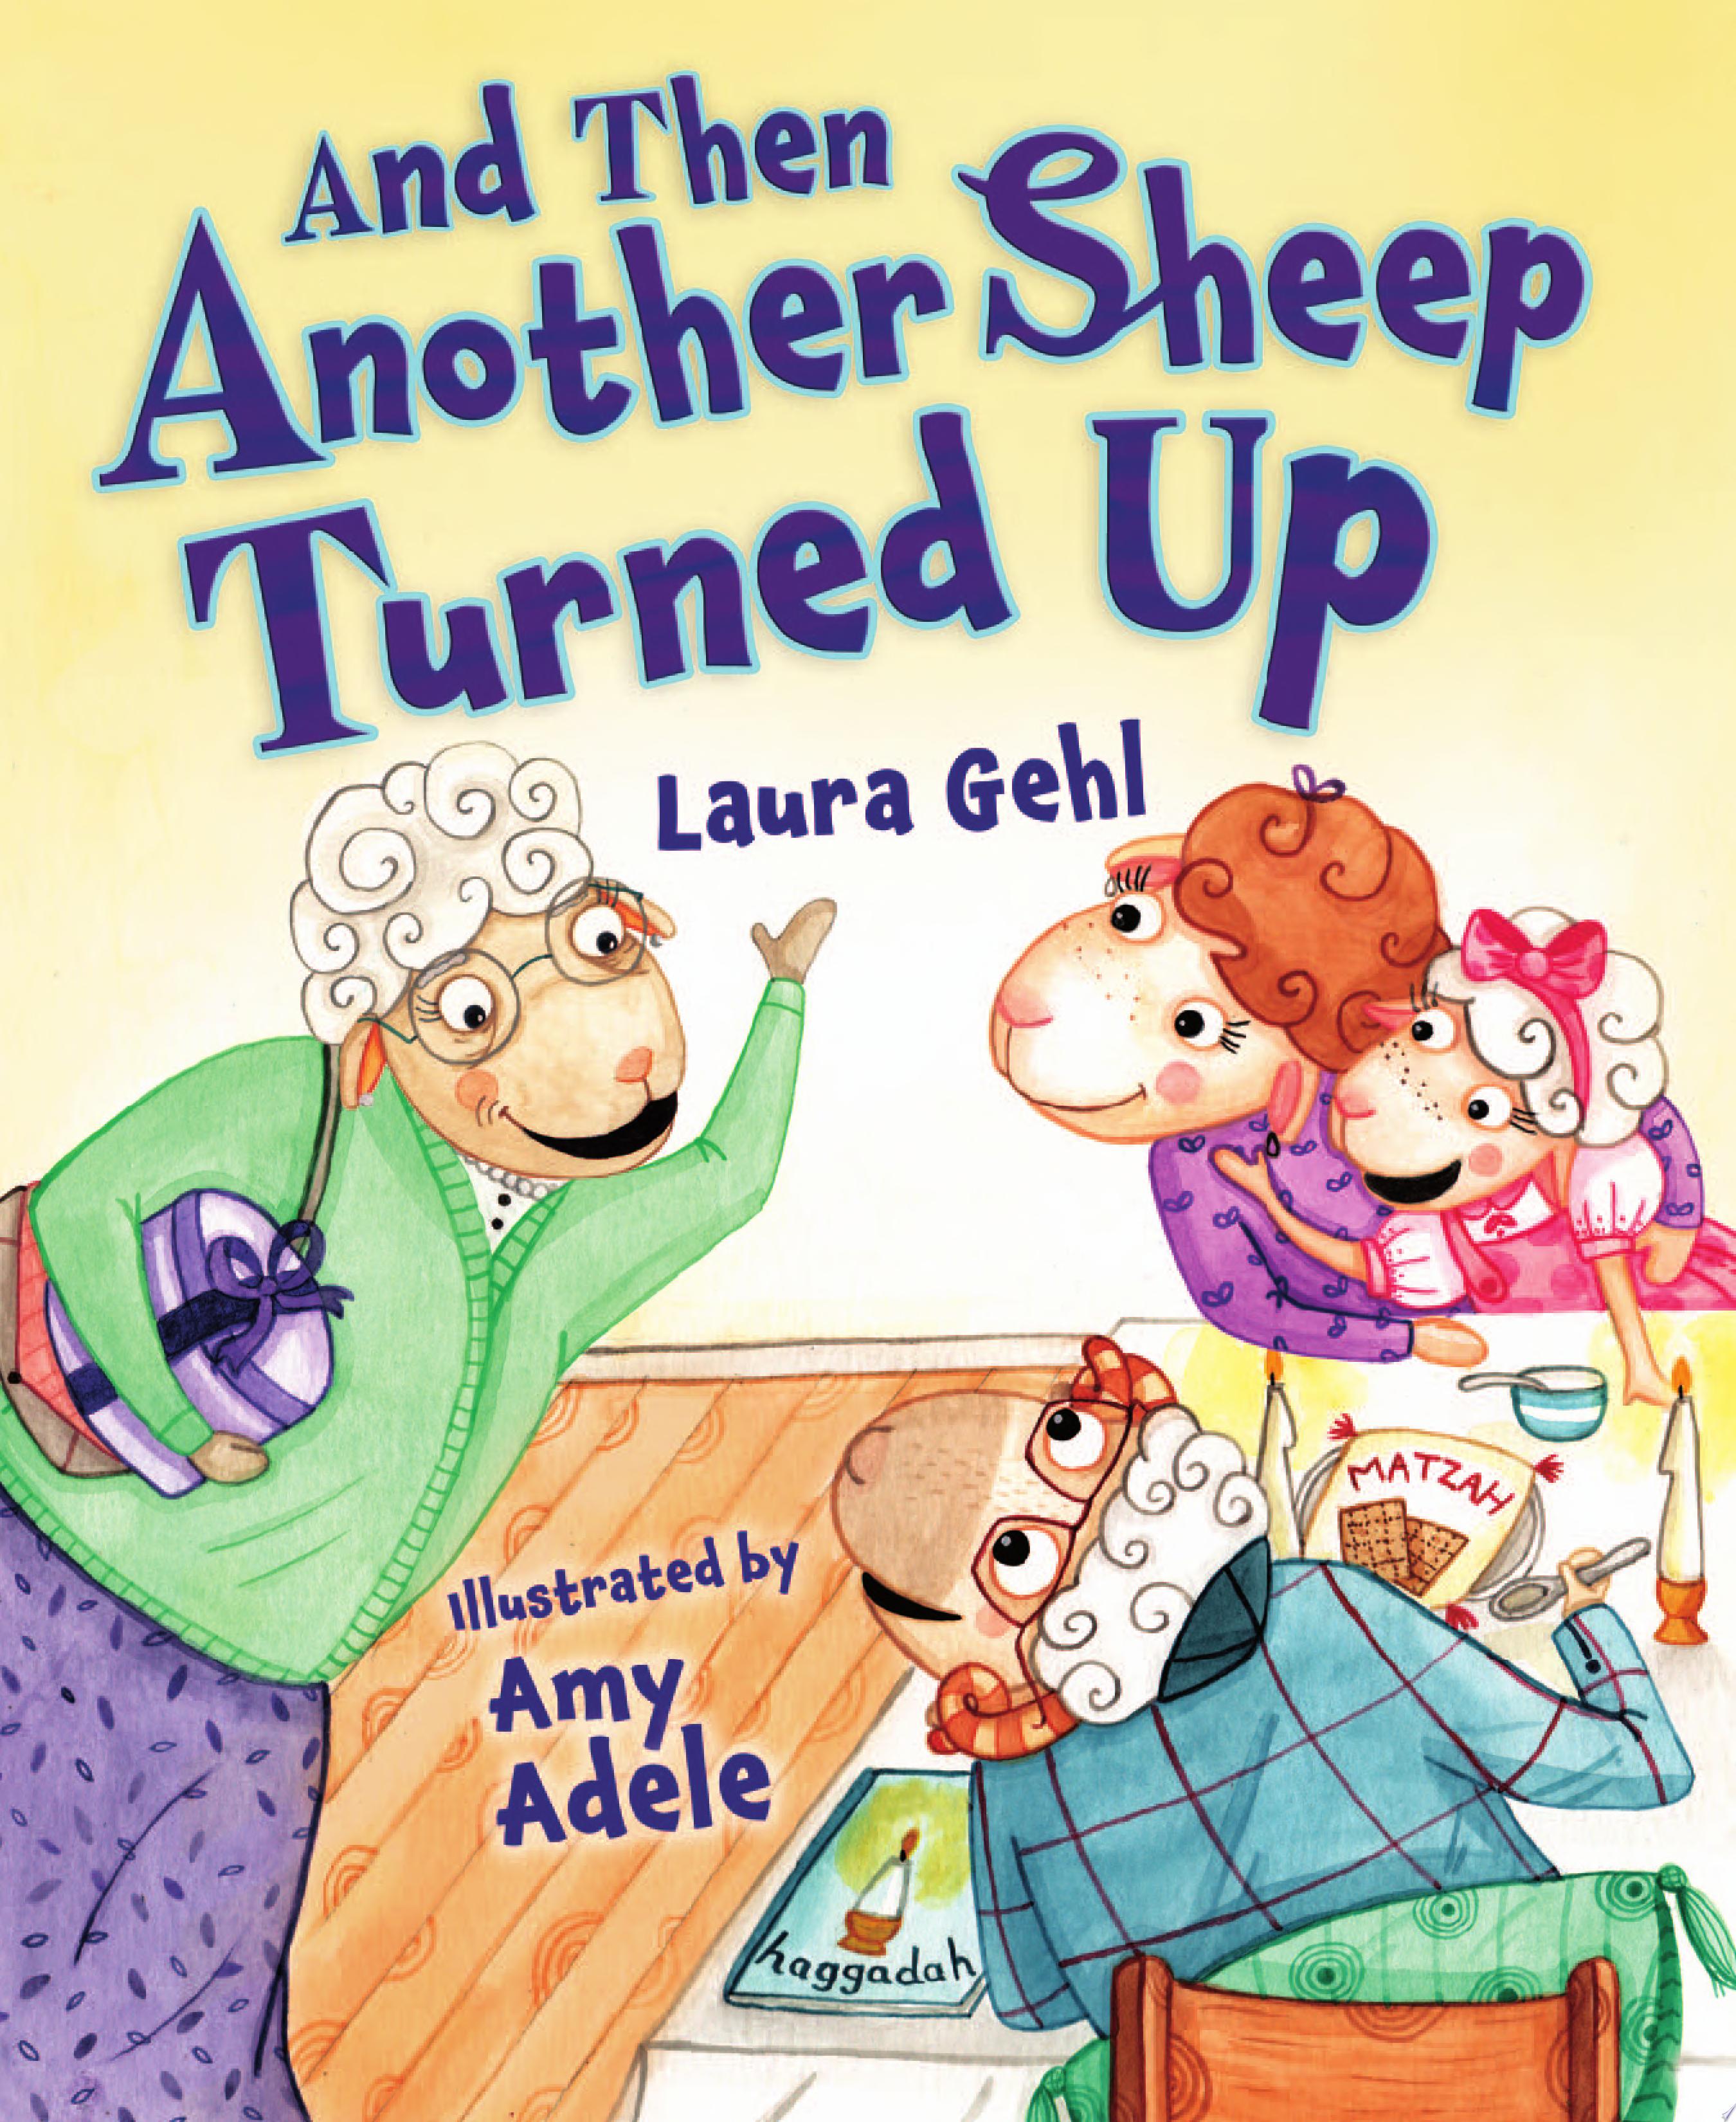 Image for "And Then Another Sheep Turned Up"